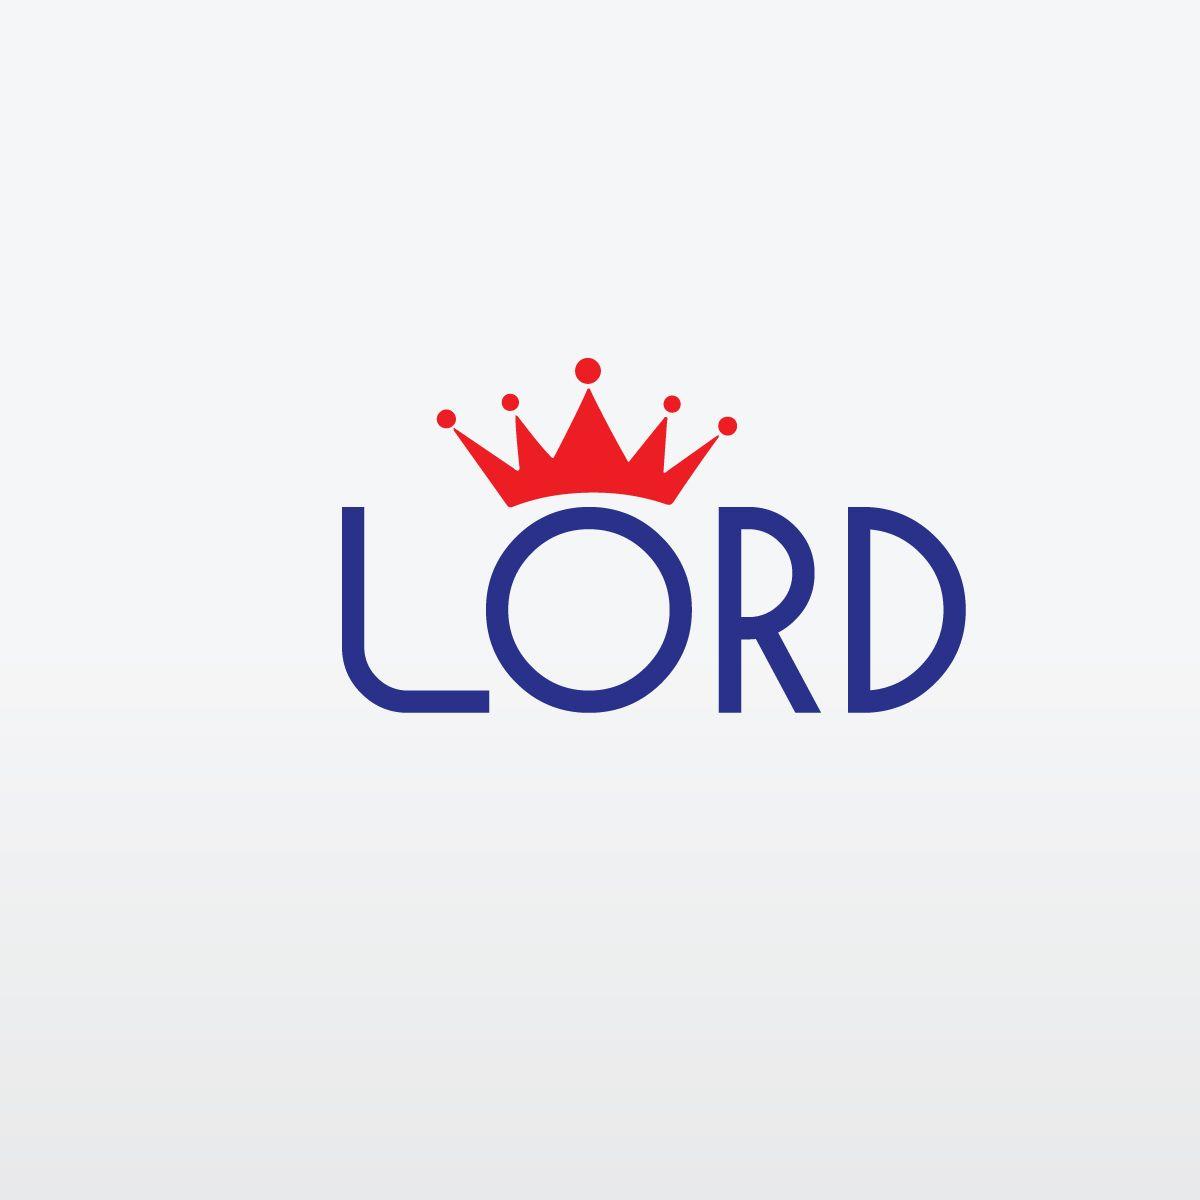 Lord Logo - Upmarket, Playful, Electrical Logo Design for LORD by dstian63 ...